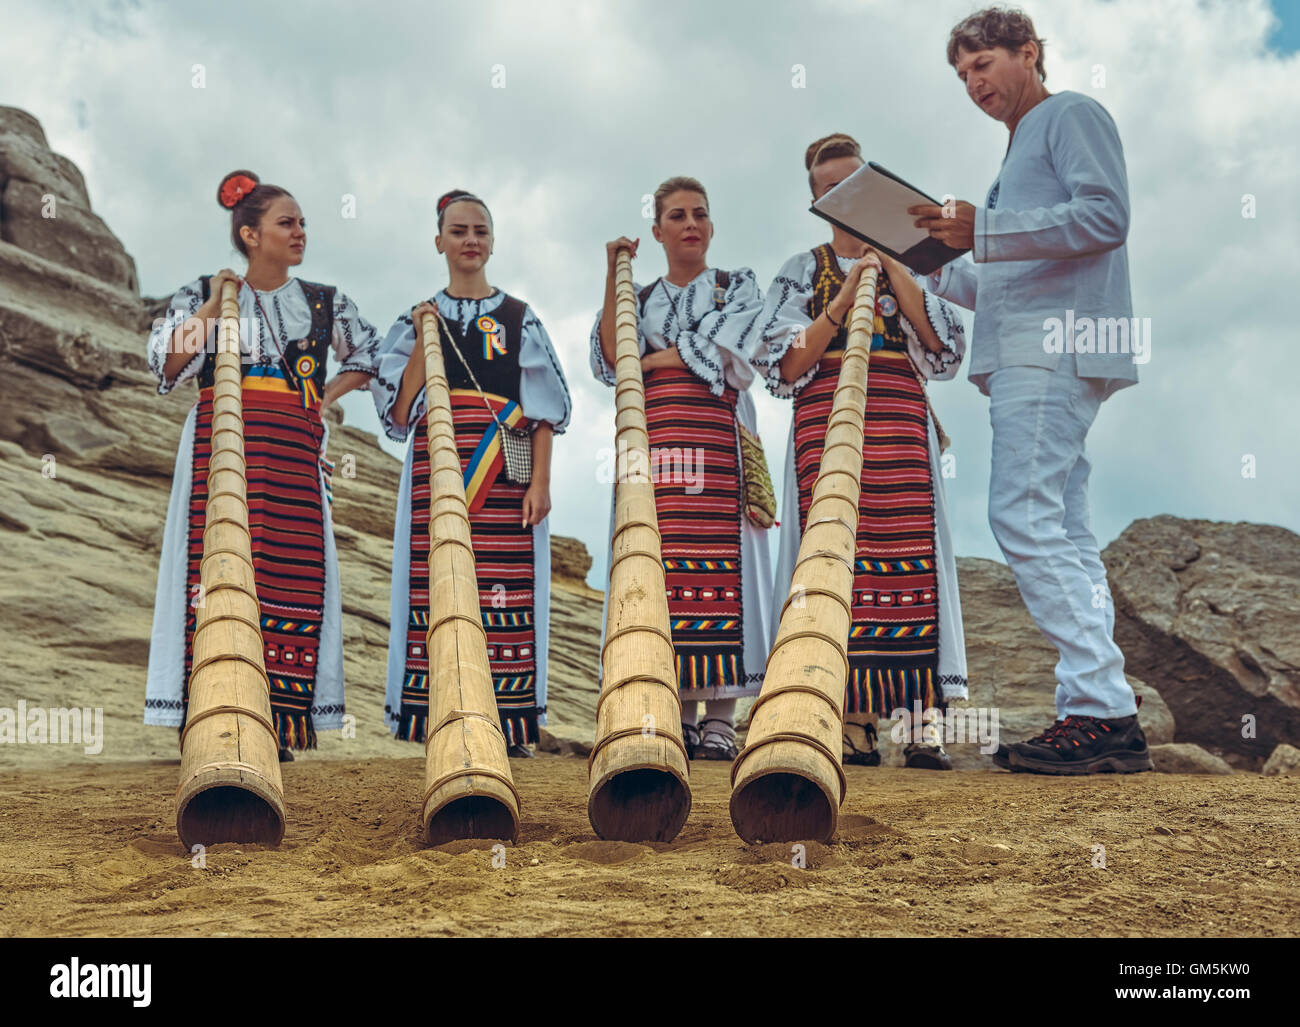 Bucegi Mountains, Romania - August 6, 2016: Romanian female tulnic players in traditional costumes pose near the Sphinx megalith. Stock Photo